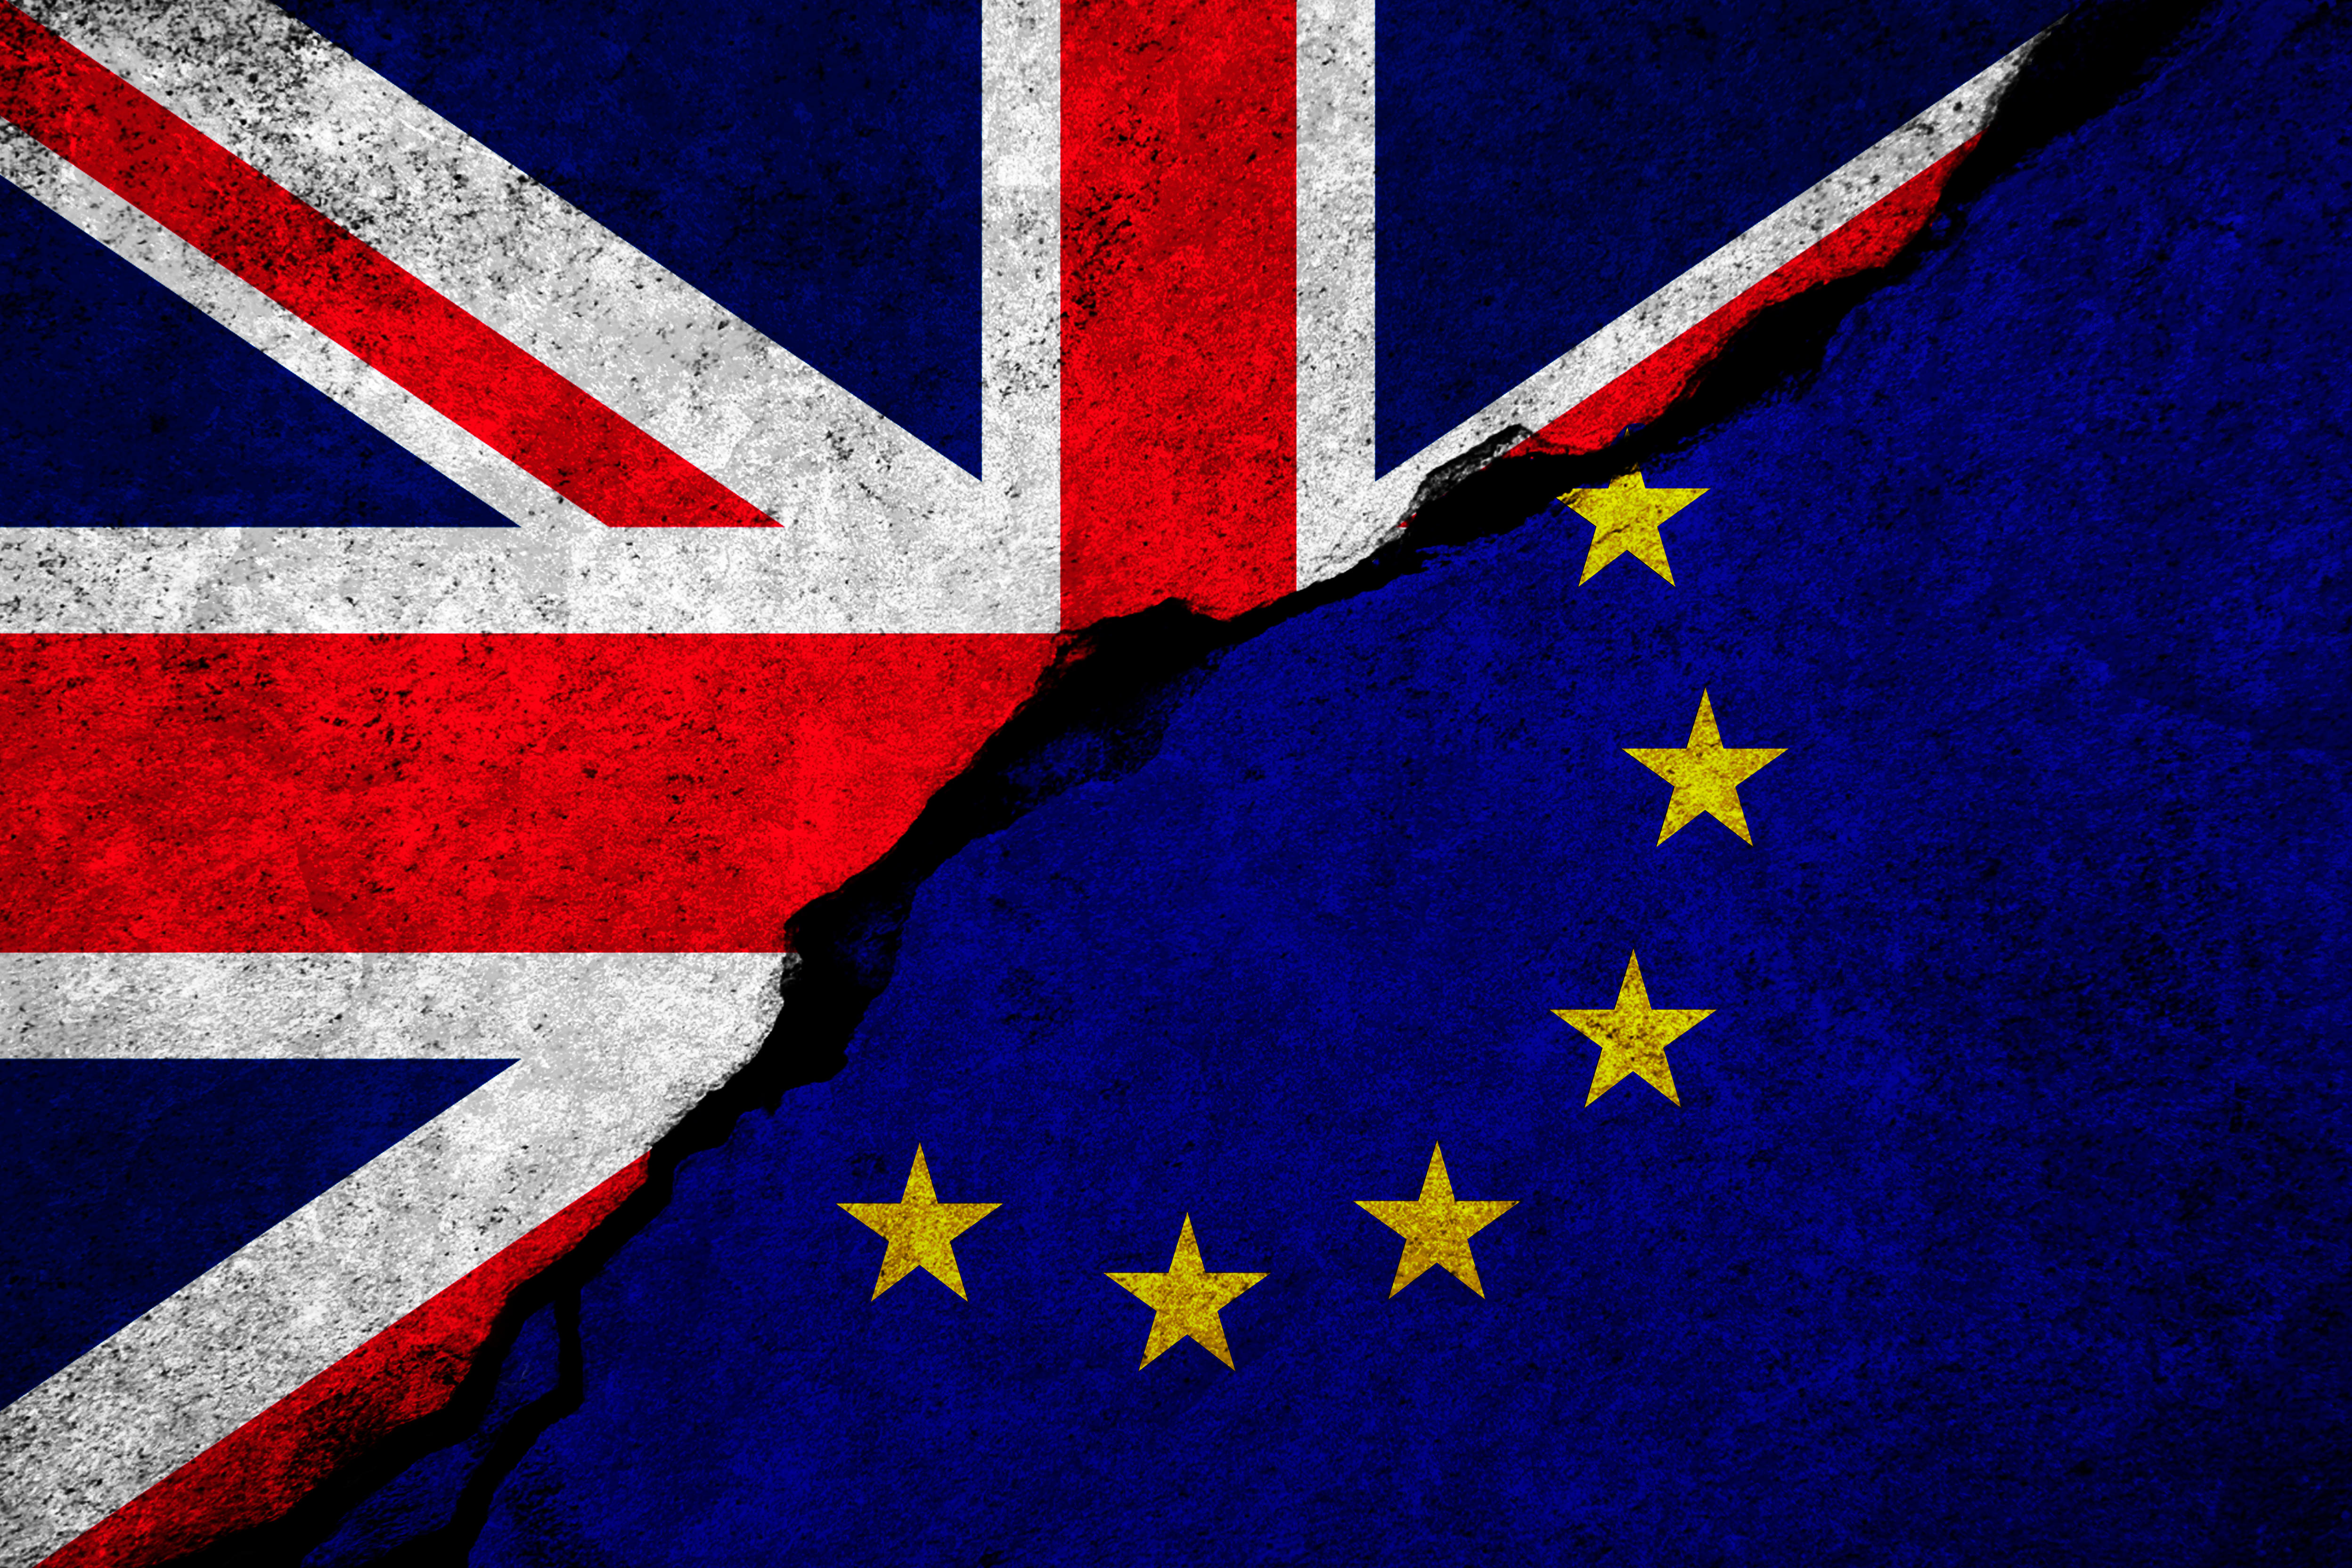 Should Britain stay in the European Union?